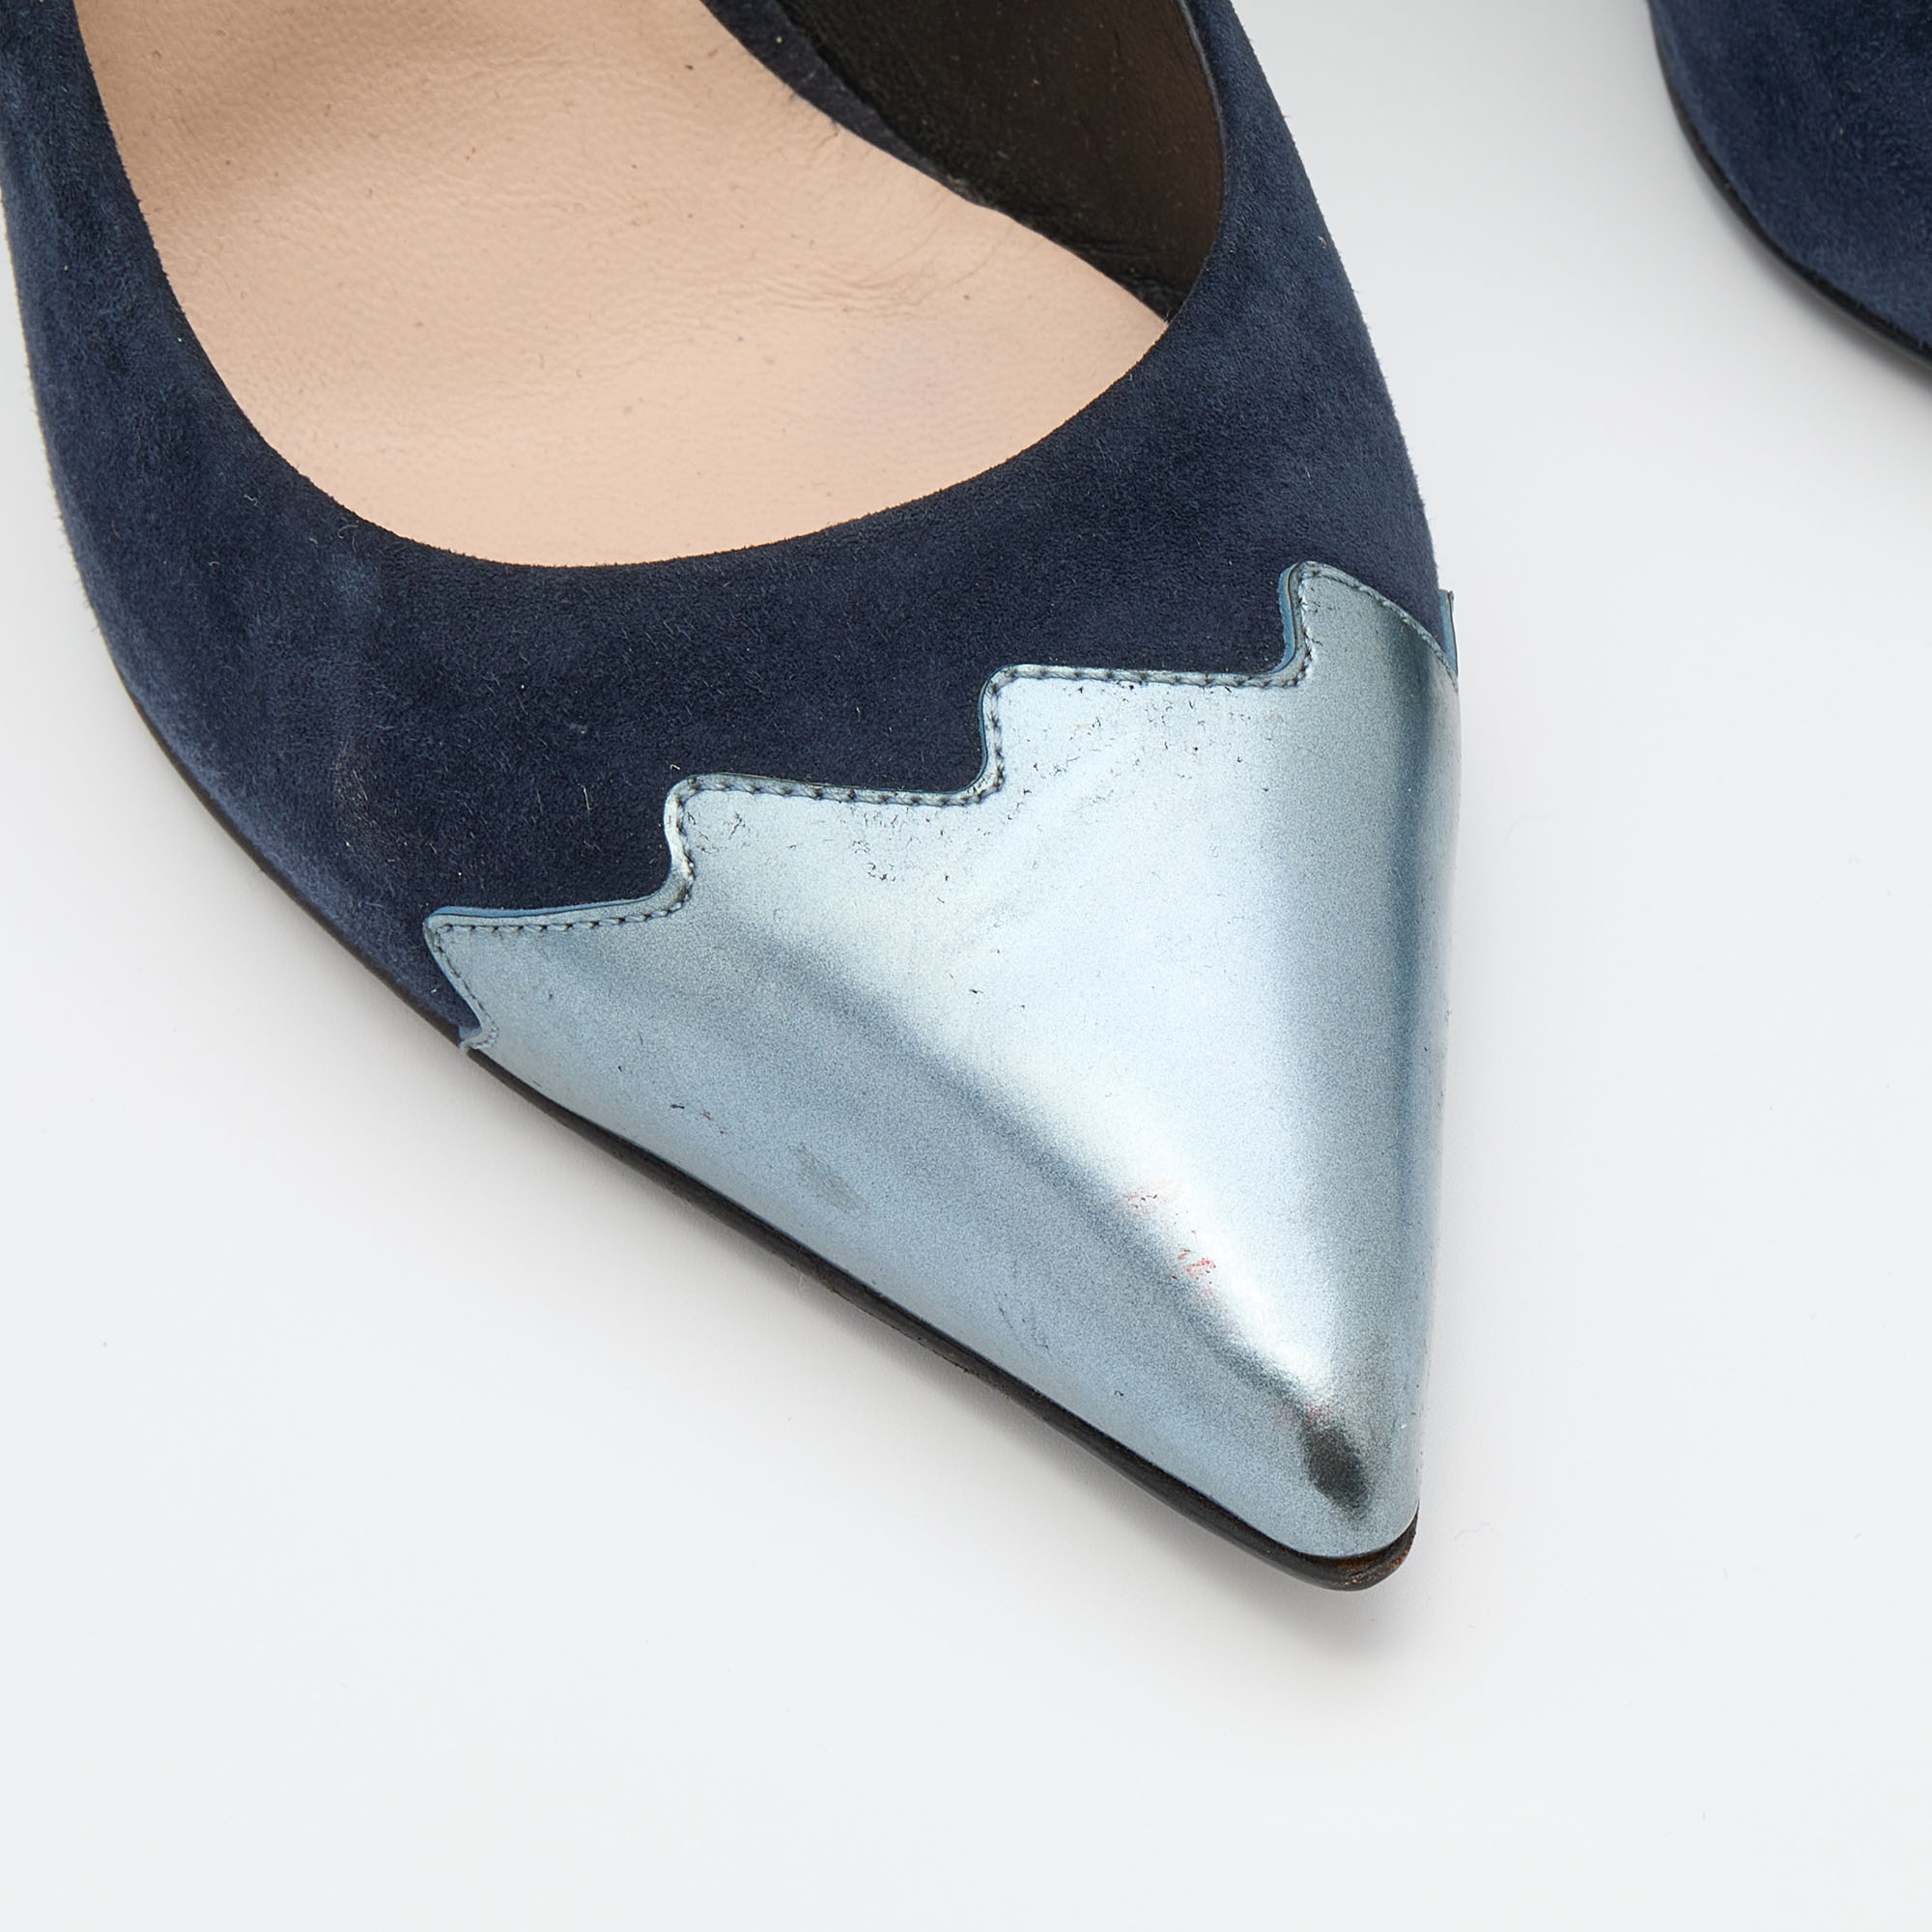 Fendi Navy Blue Suede And Leather Pointed Toe Pumps Size 38.5